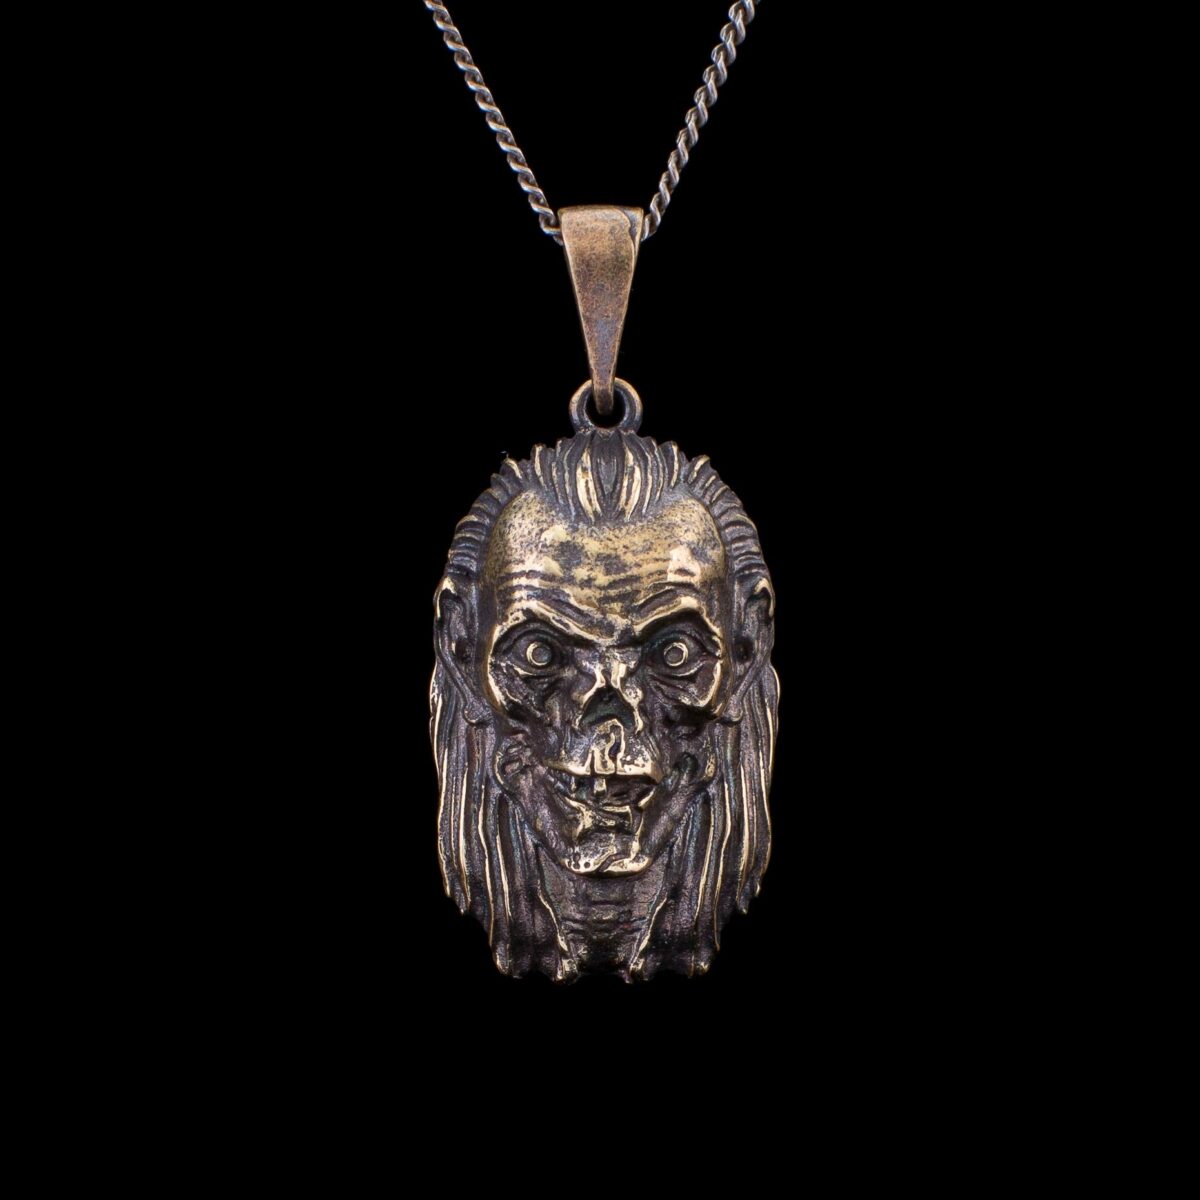 Tales from the Crypt Pendant